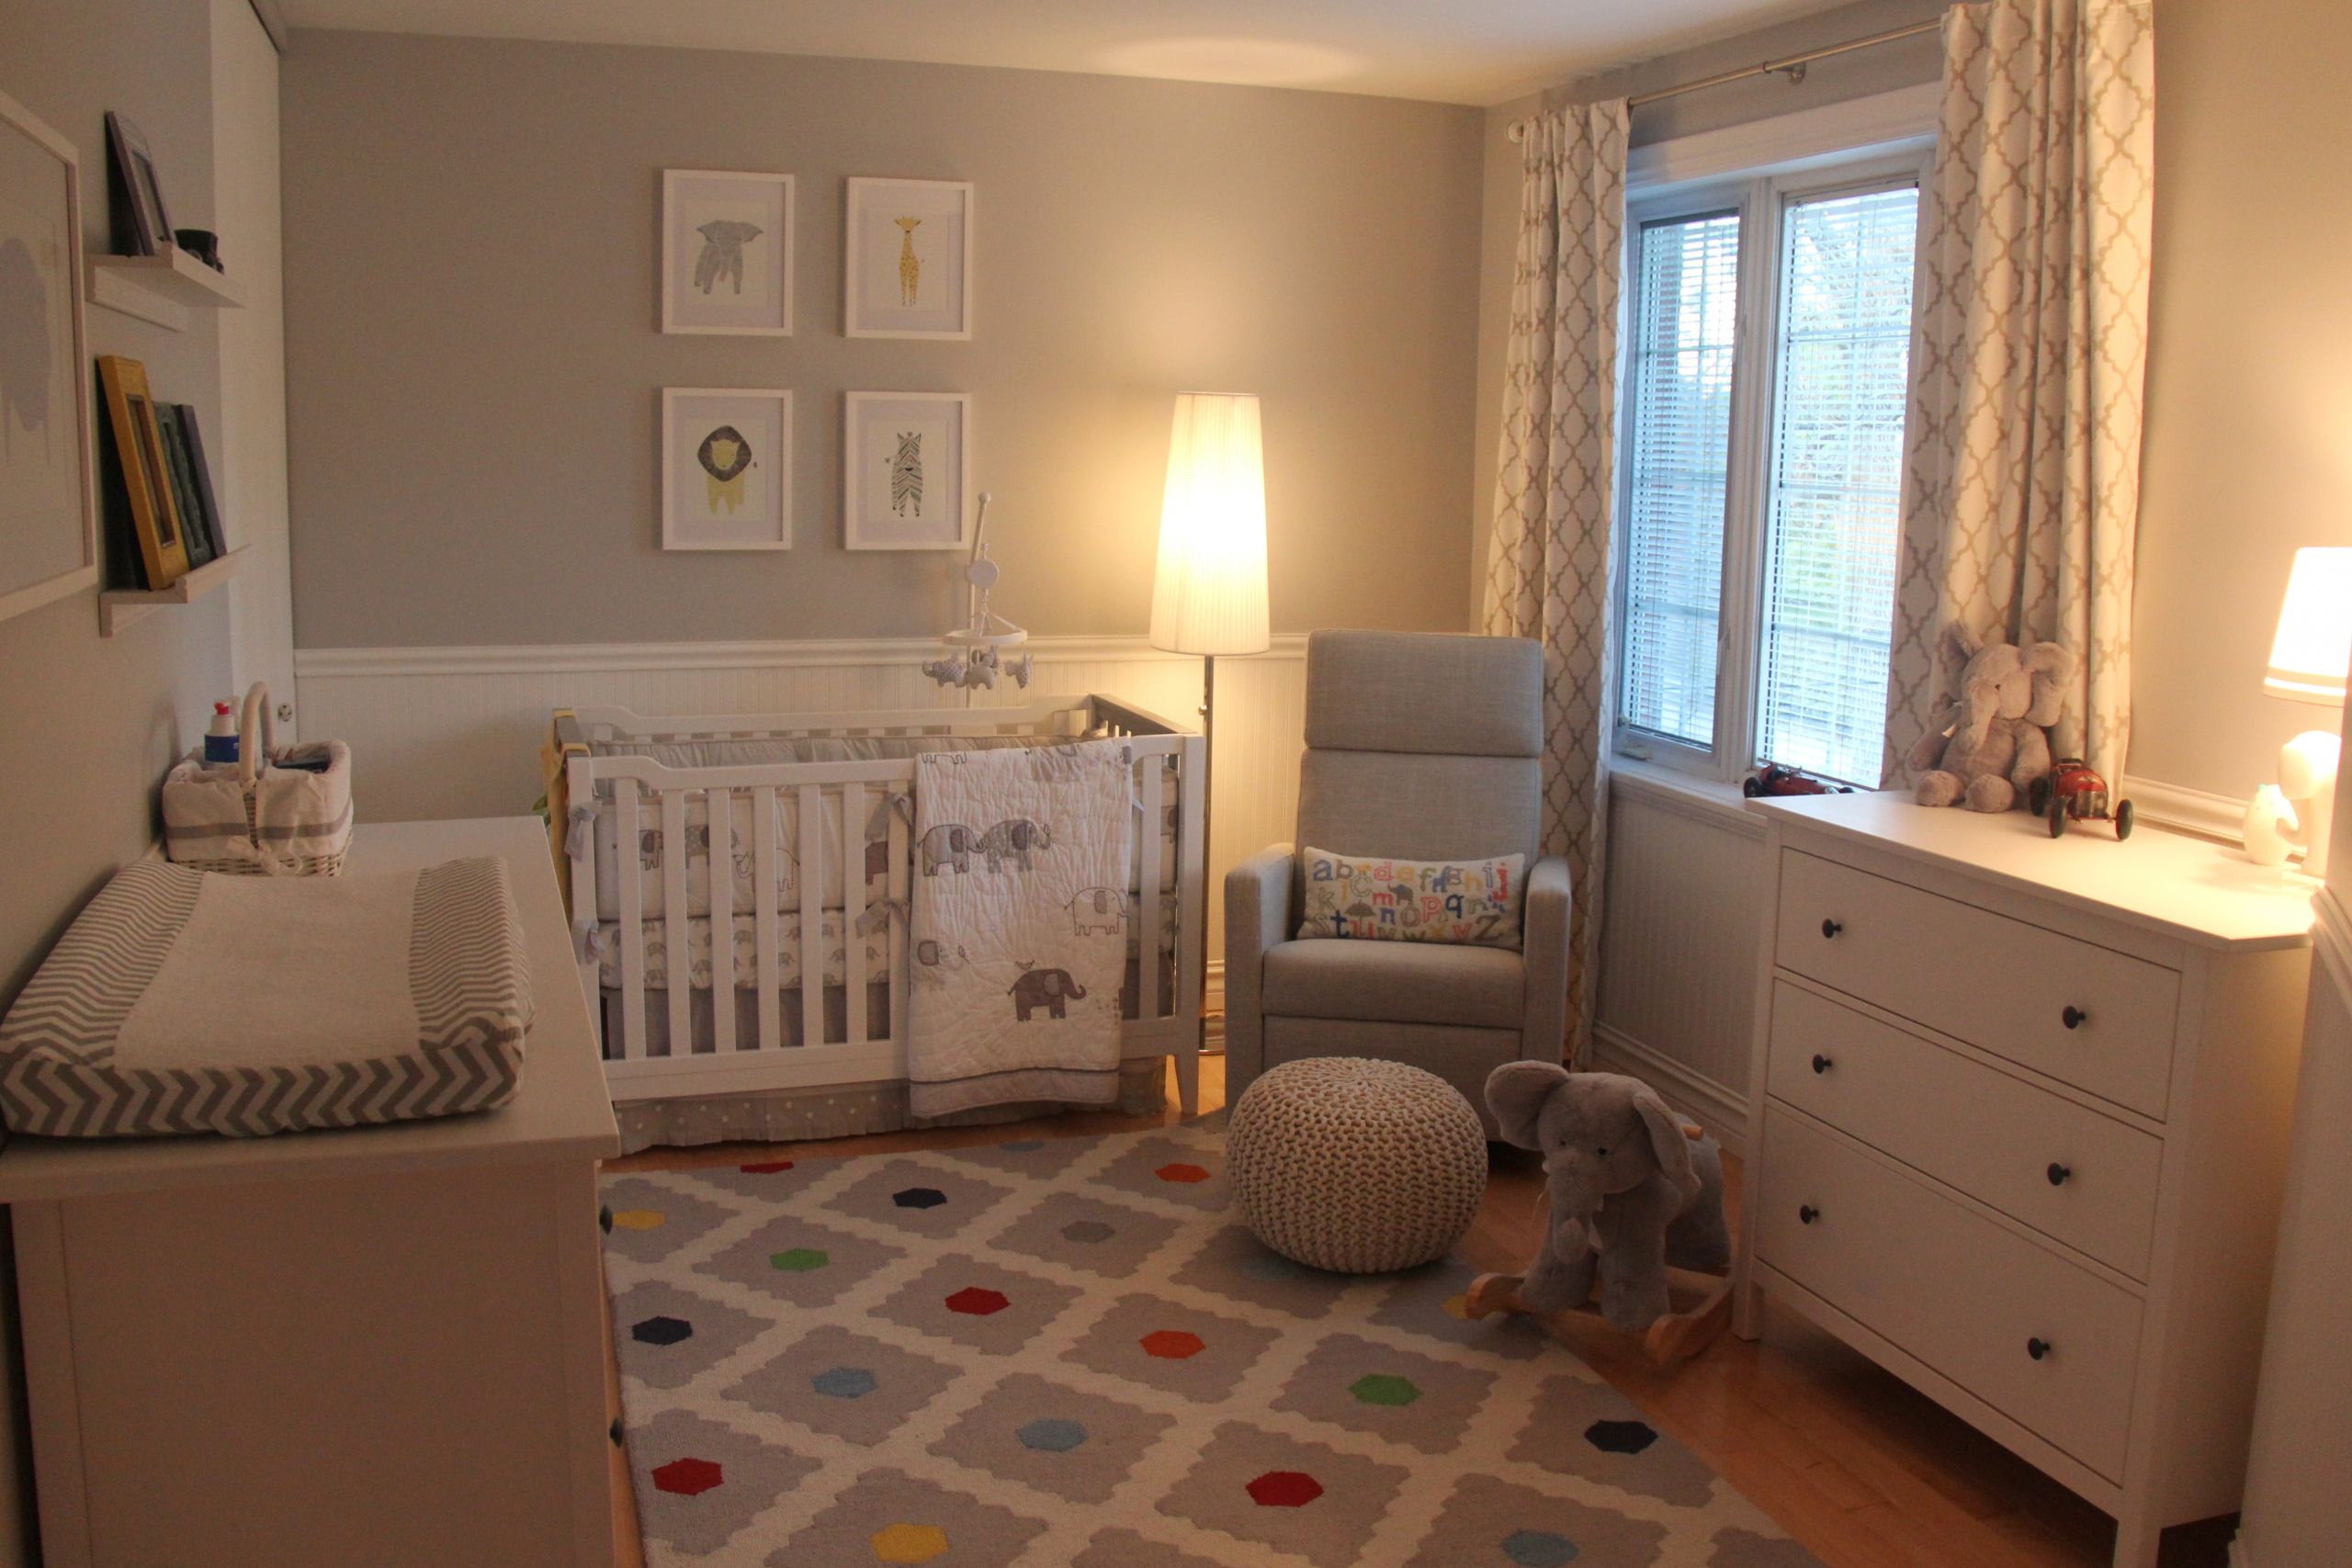 Baby Boys Room Decorating Ideas
 Our Little Baby Boy s Neutral Room Project Nursery